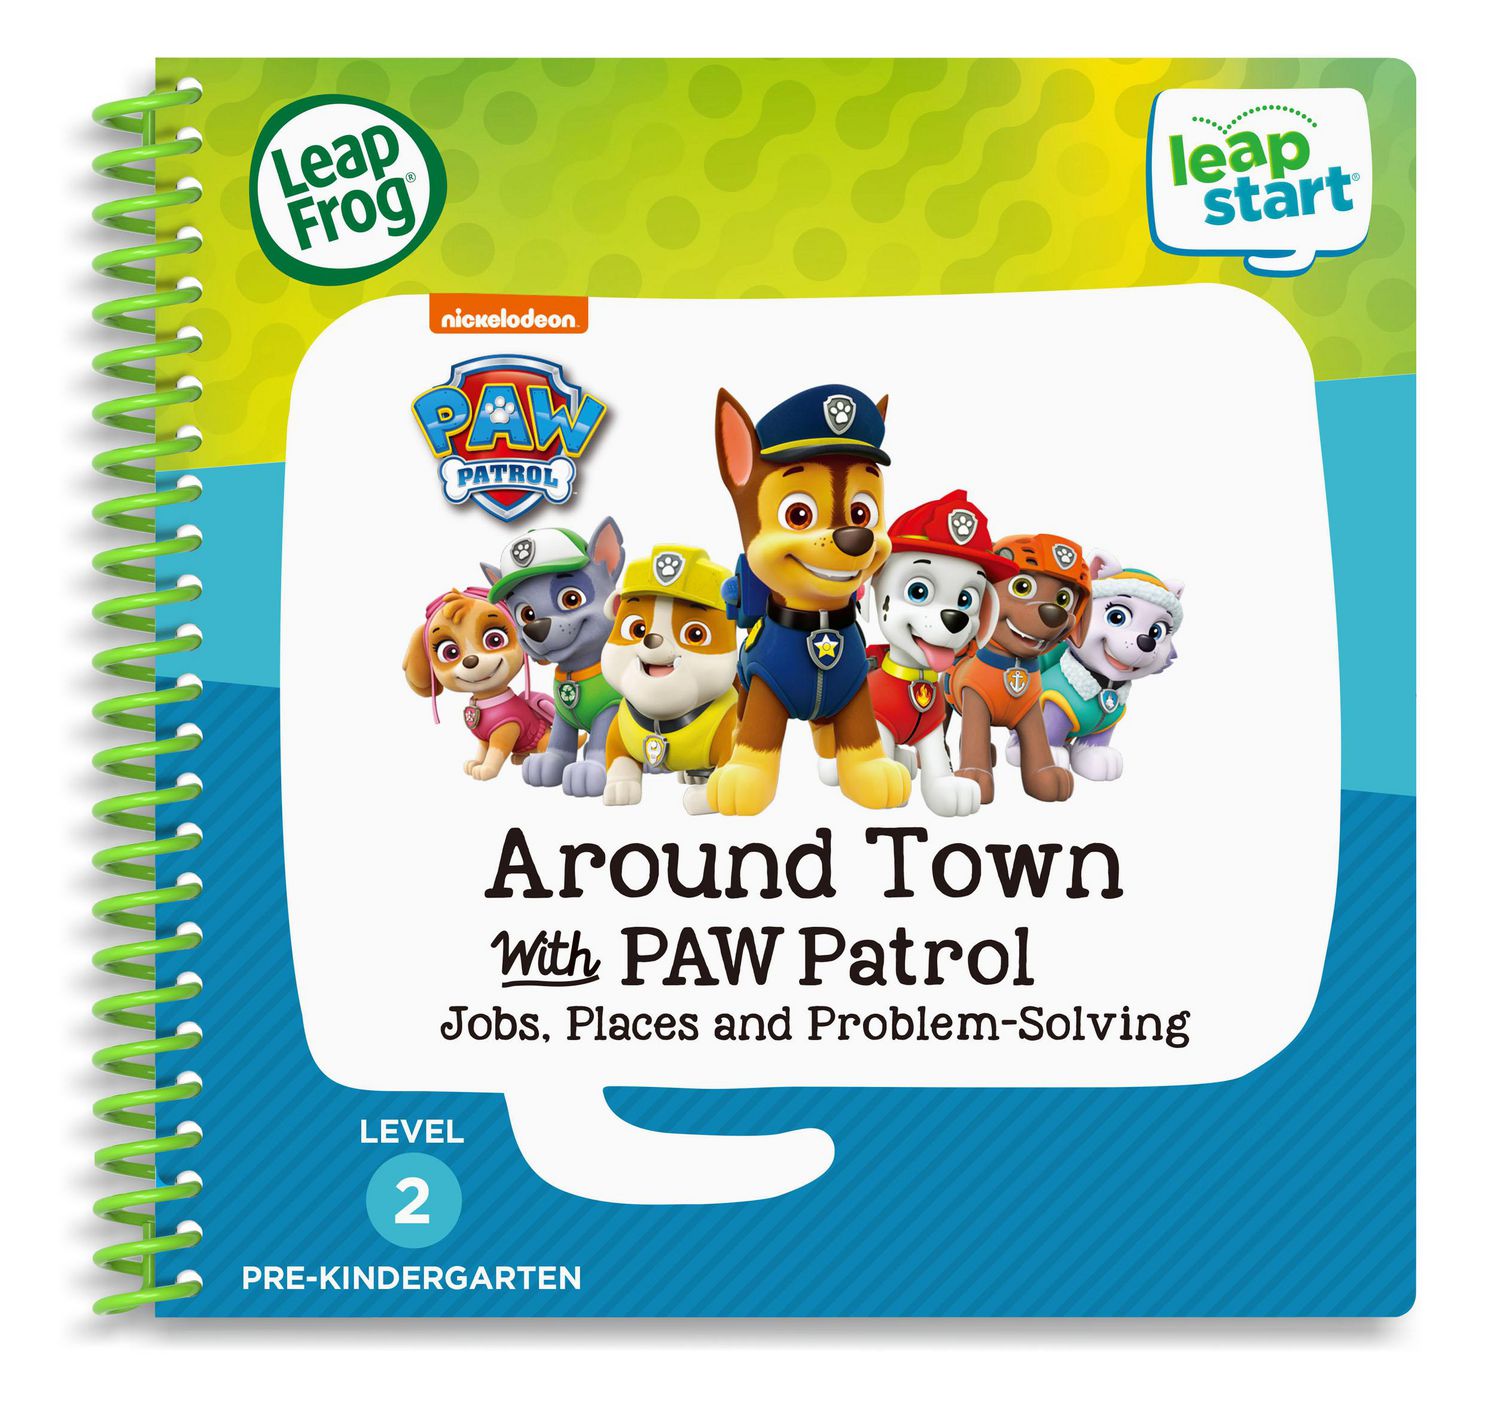 Activity　LeapStart　Around　with　Patrol.　Jobs,　Solving　LeapFrog　Pre-K　Problem　Places　years　Town　(Level　2)　to　PAW　Book,